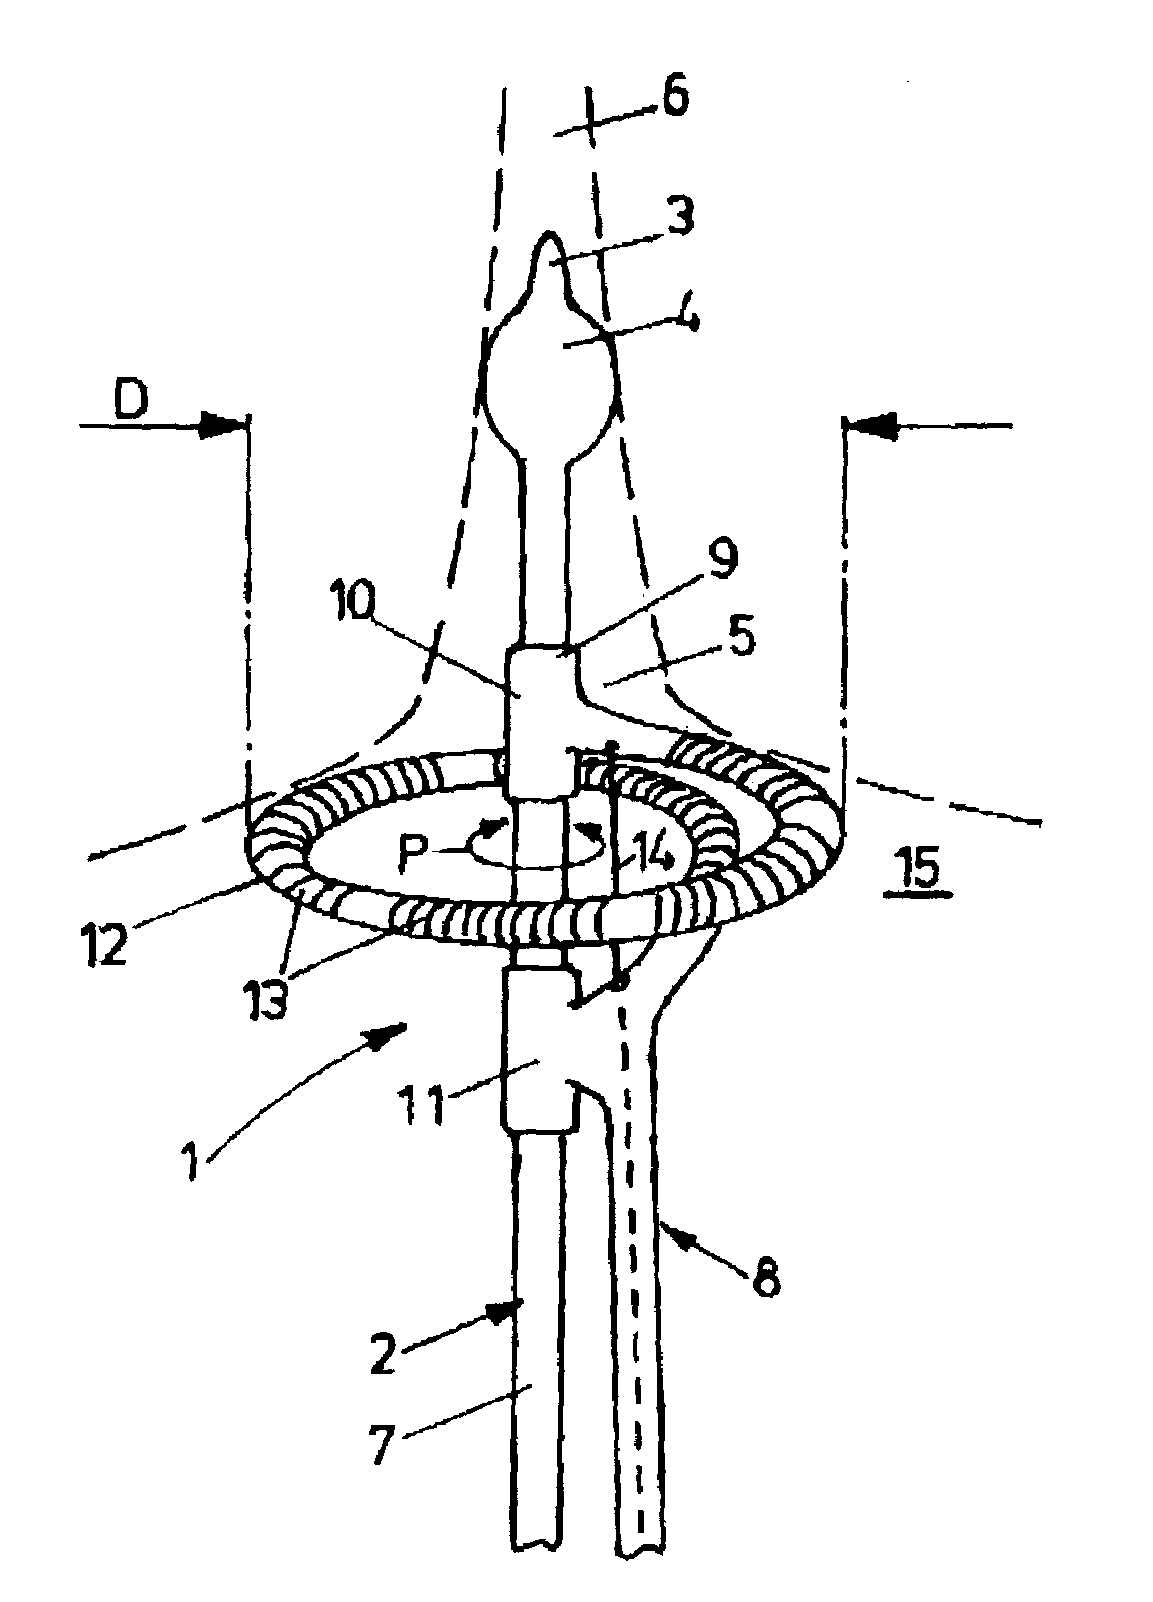 Ablation device for cardiac tissue, in particular for a circular lesion around a vessel orifice in the heart